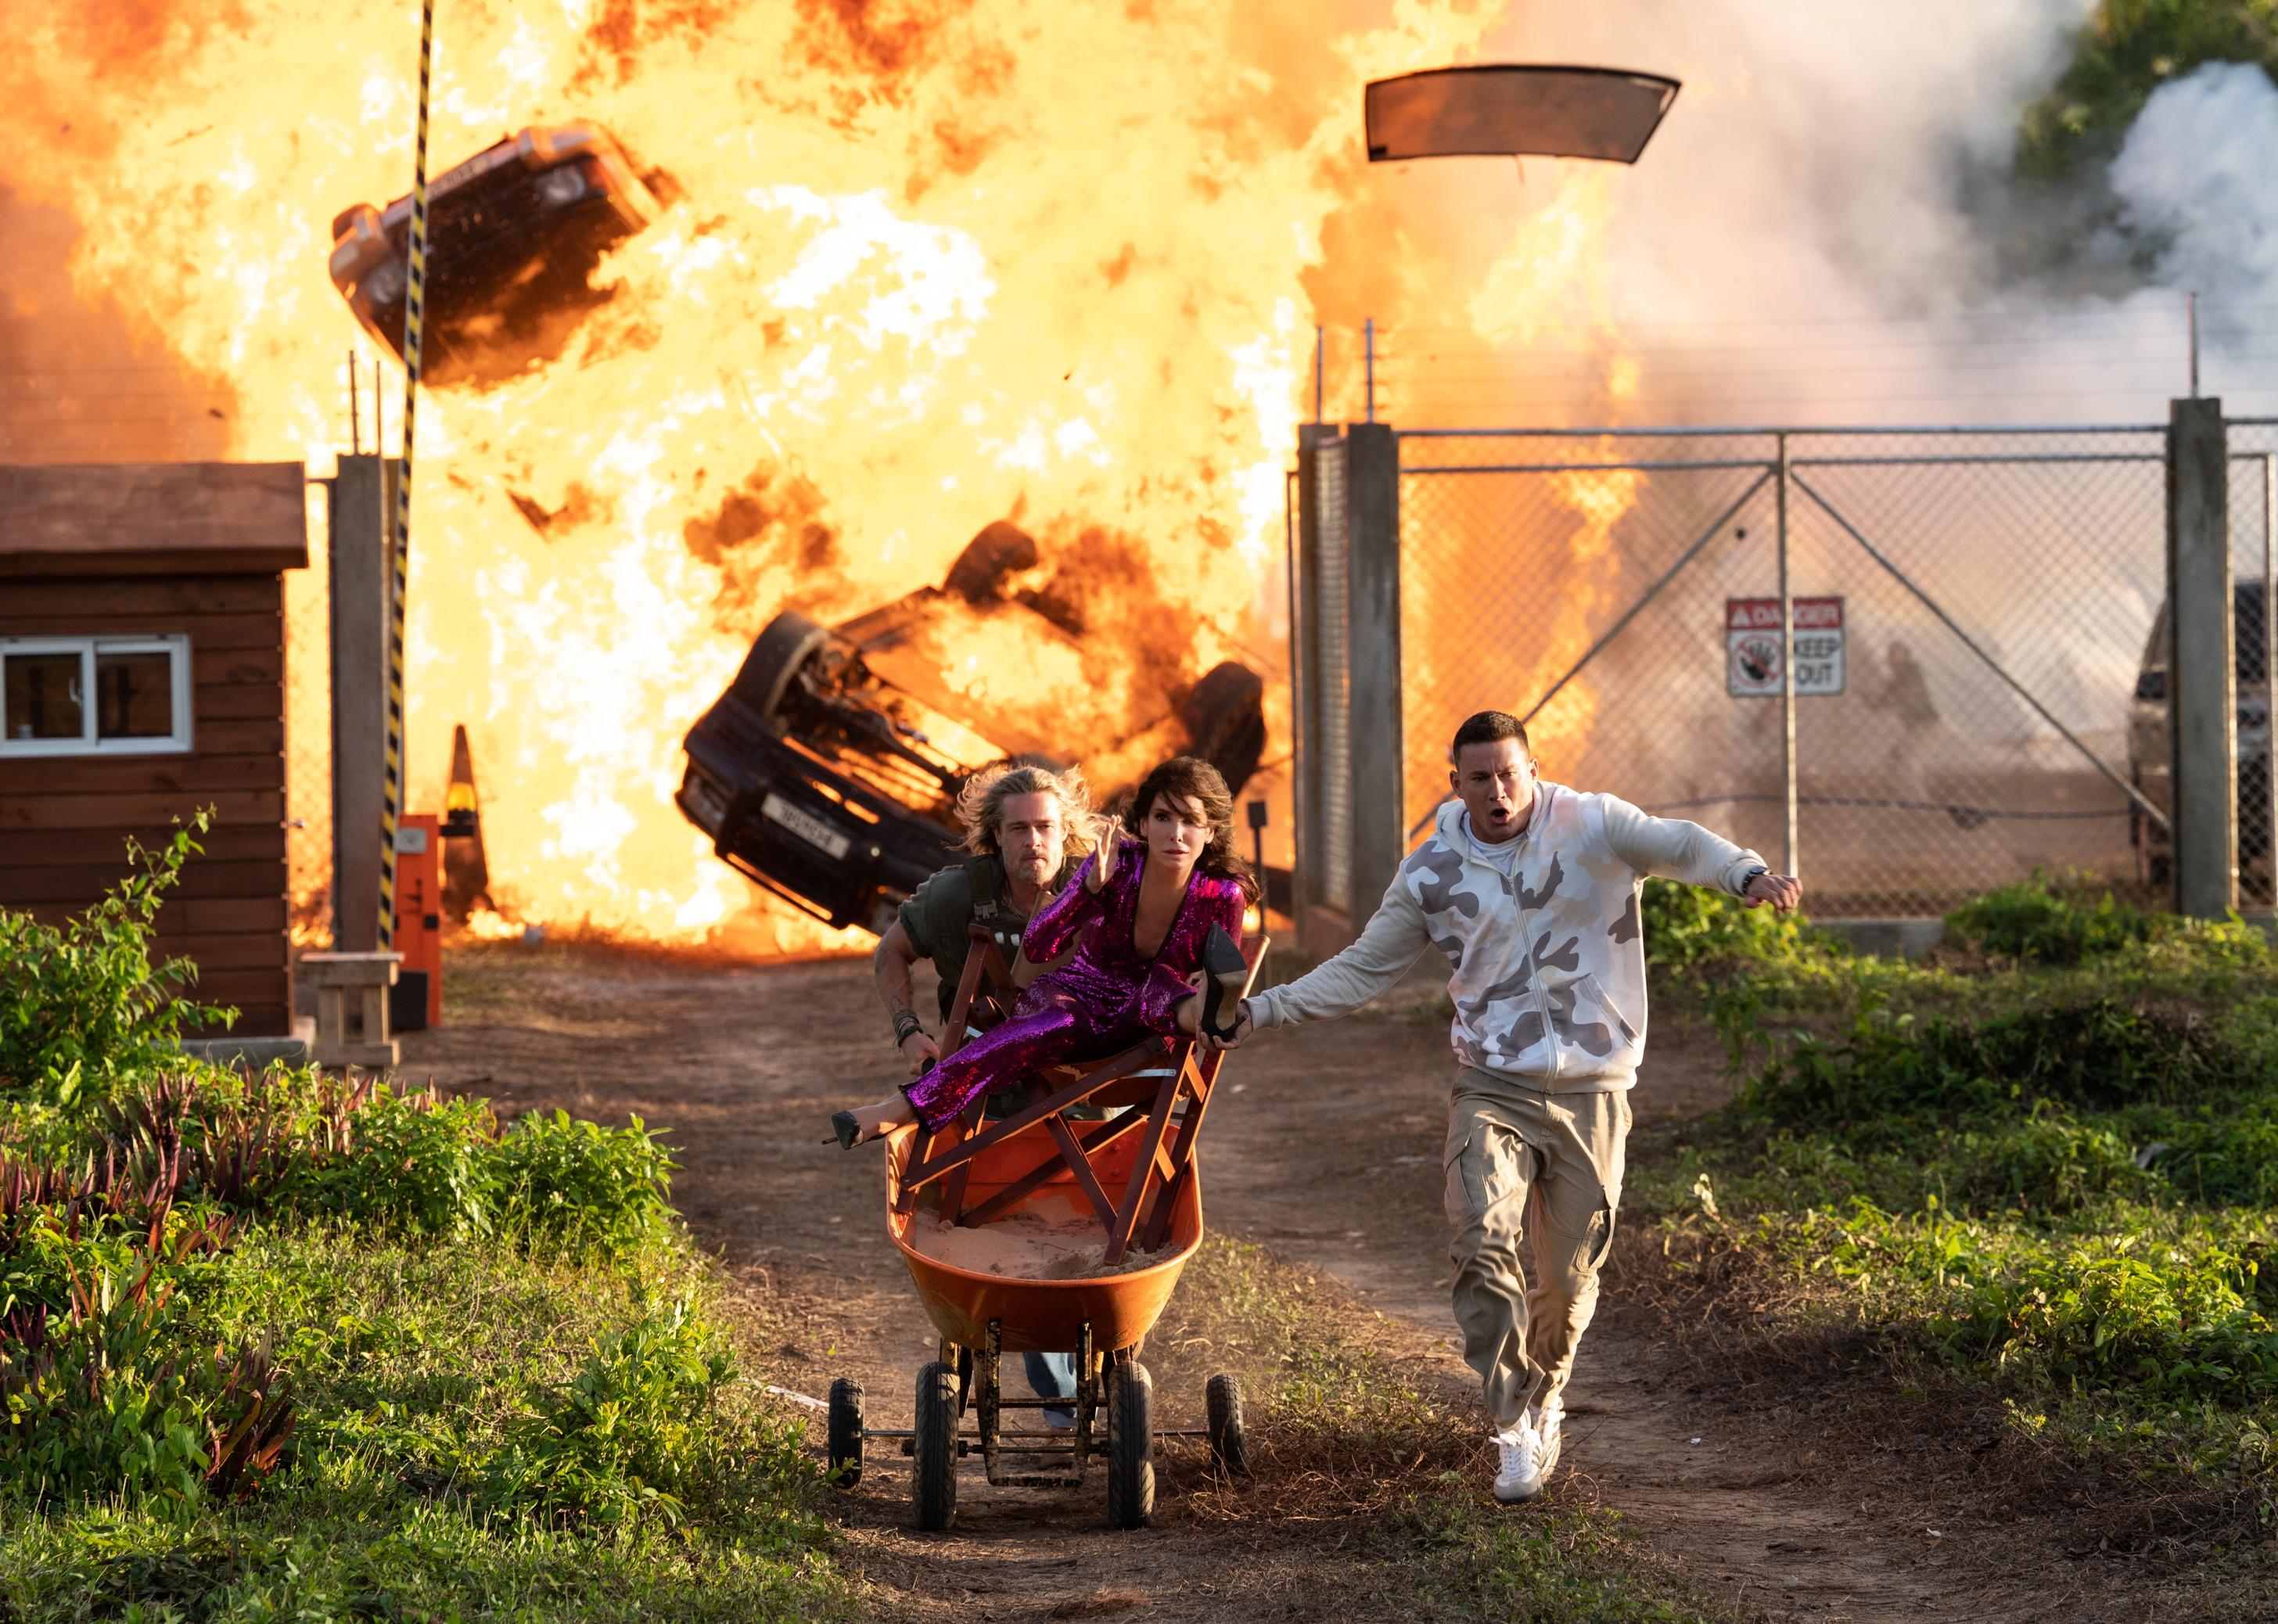 Brad Pitt and Channing Tatum pushing Sandra Bullock in a wheelbarrow from a large explosion in the background.